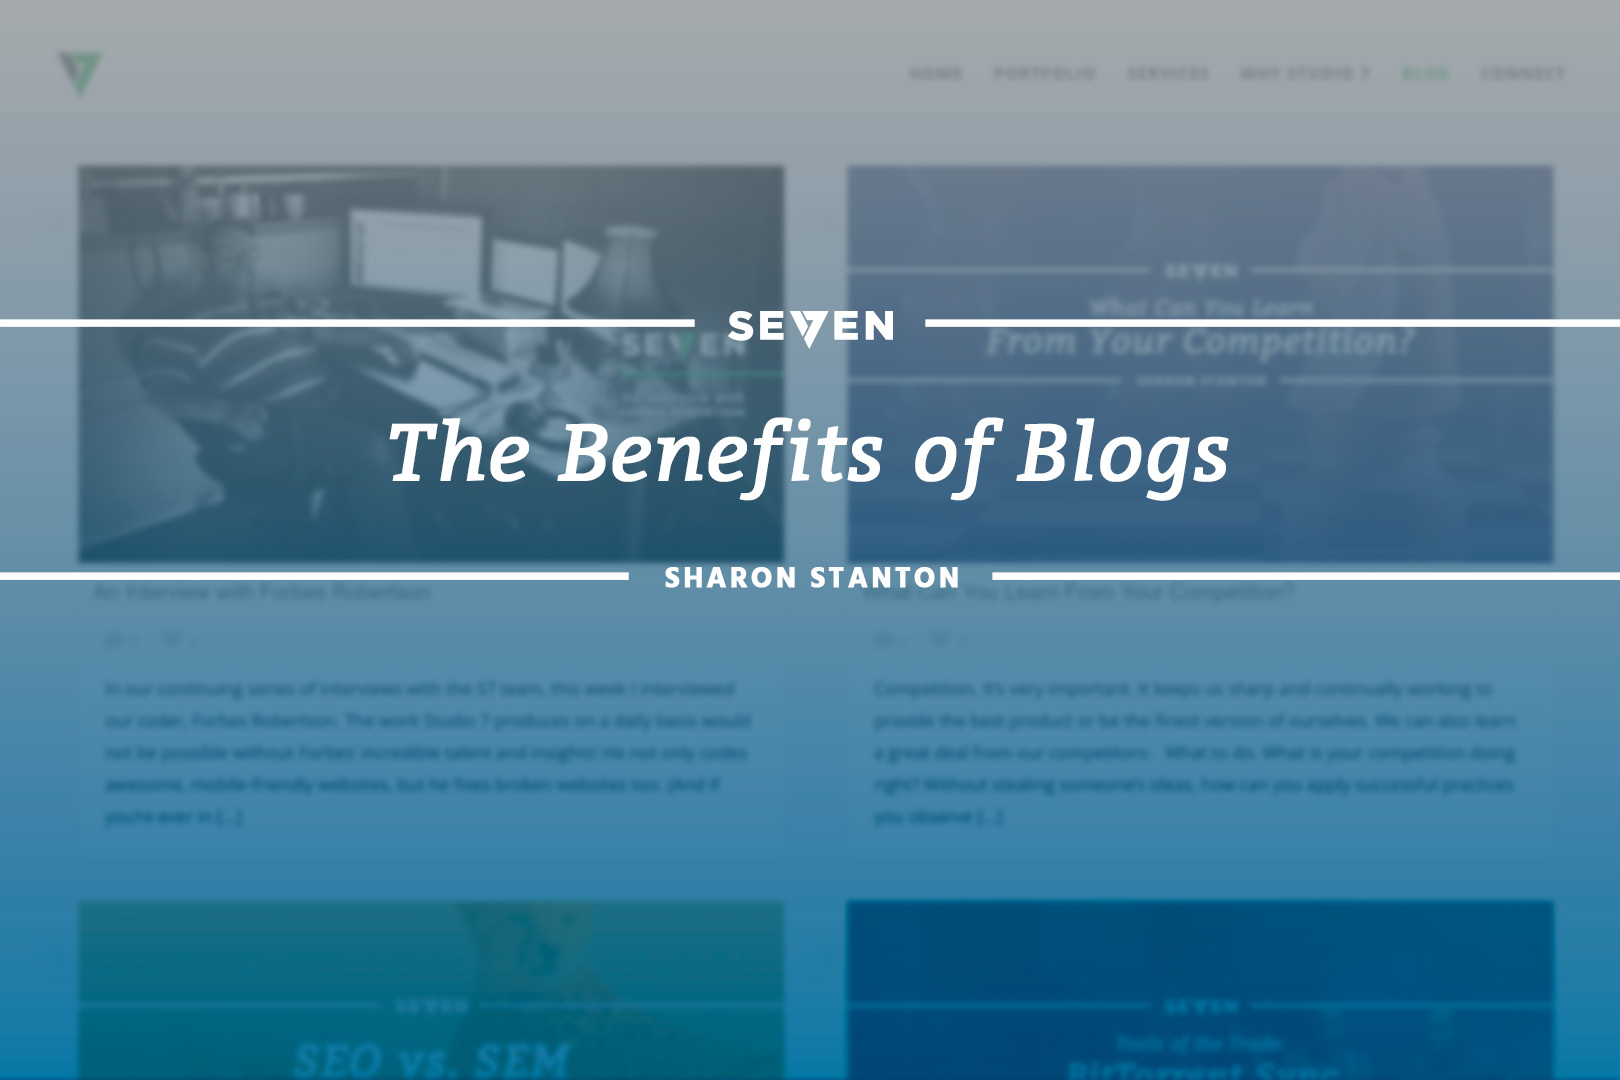 The Benefits of Blogs